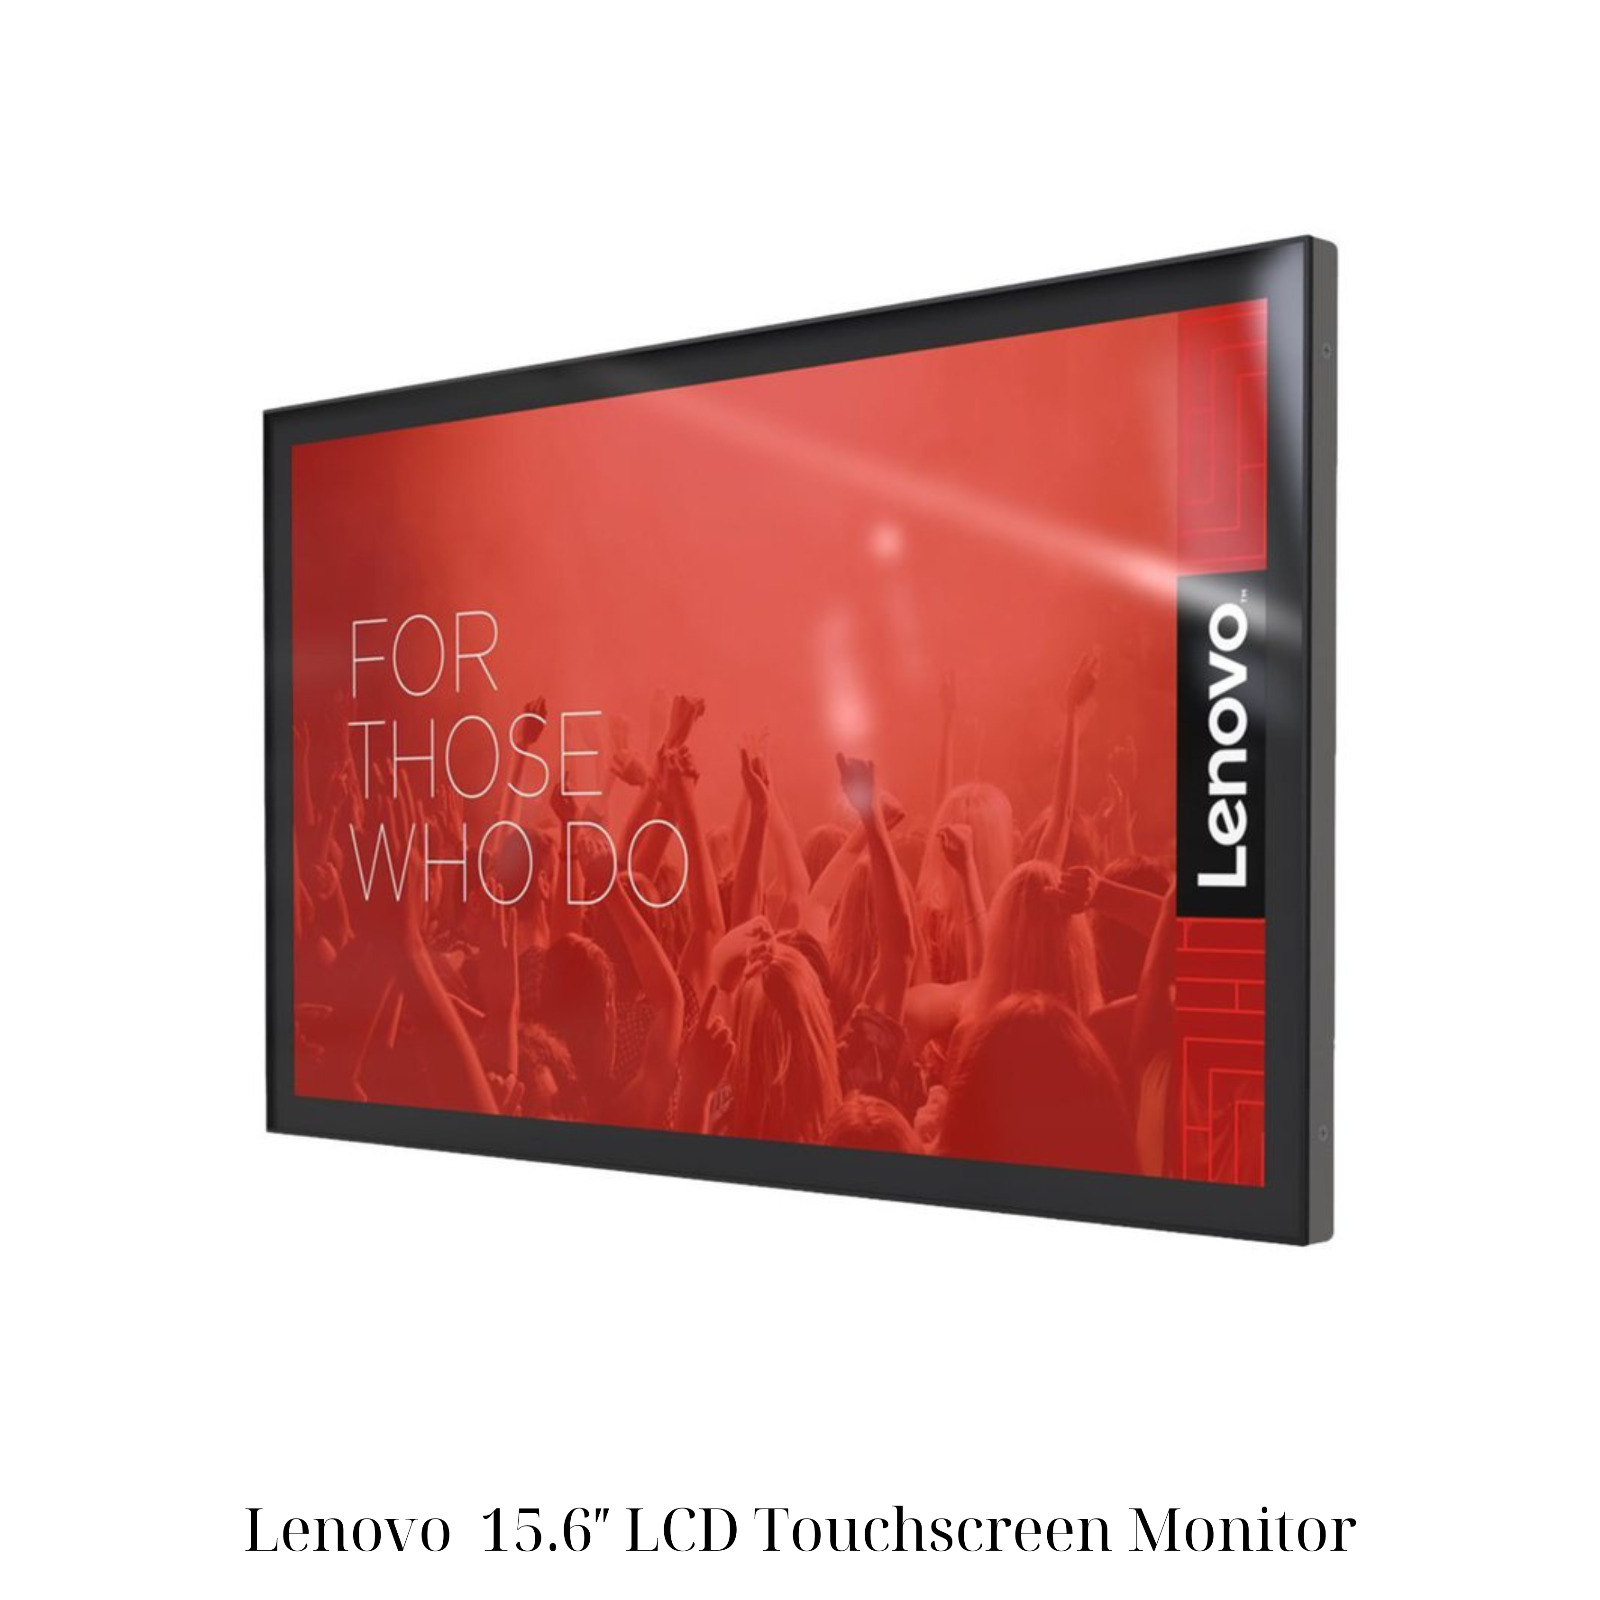 Brand New Lenovo 4ZF1B20559 inTOUCH156B 15.6″ LCD Touchscreen Monitor 